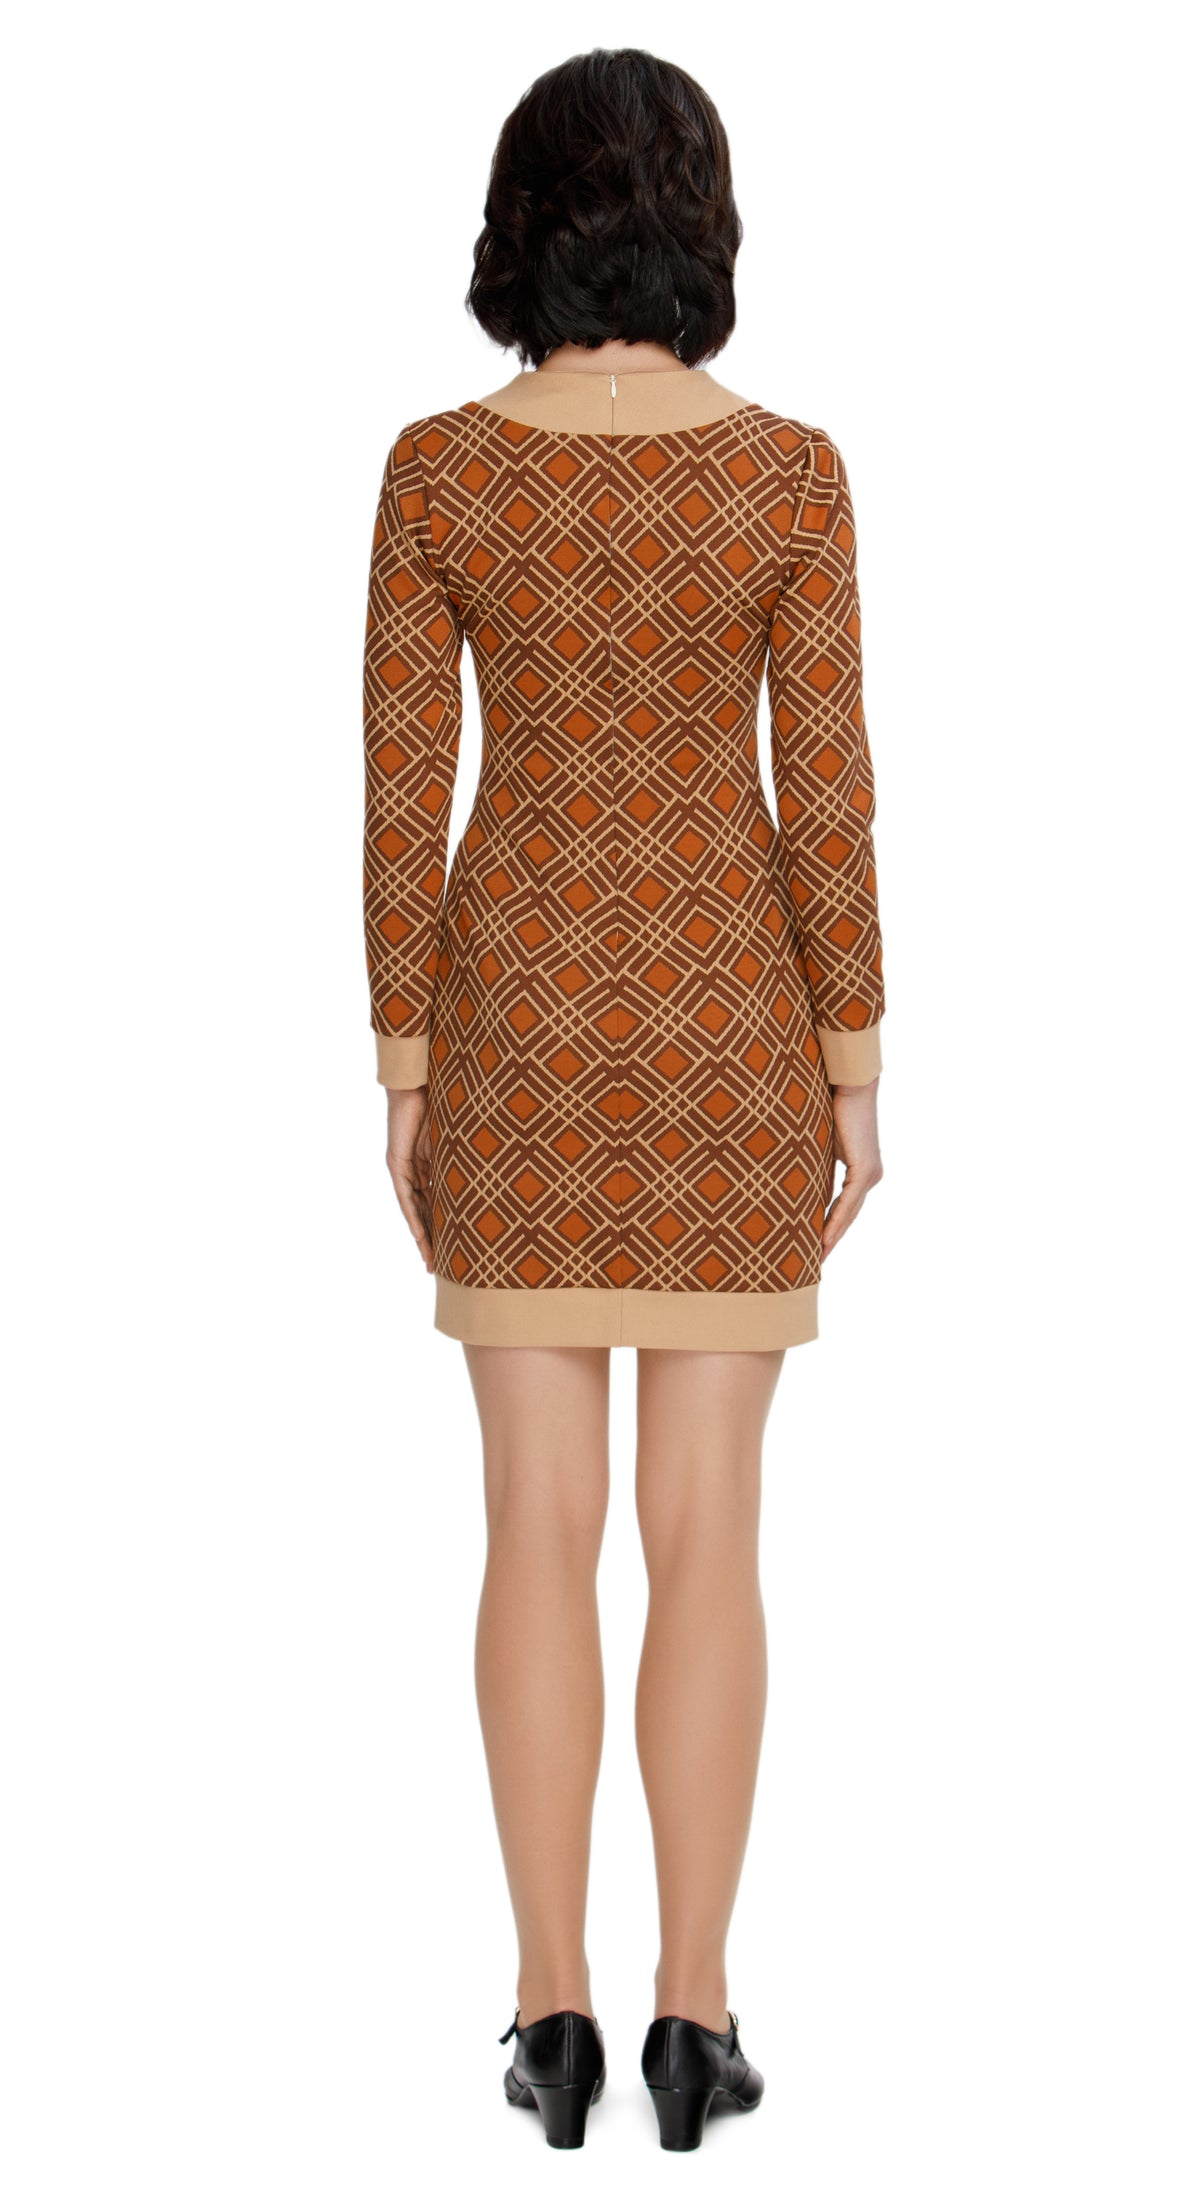 Indulge in seventies nostalgia with our Fitted Jersey Retro Style Autumn Dress, showcasing a rich autumn color, distinctive print, and striking beige accents. This dress features full sleeves for extra warmth and a classic round collar with a offering an authentic vintage vibe. Comfortable and effortlessly chic, it's your go-to choice for a smooth shift from daytime to a captivating evening look in the autumn season.